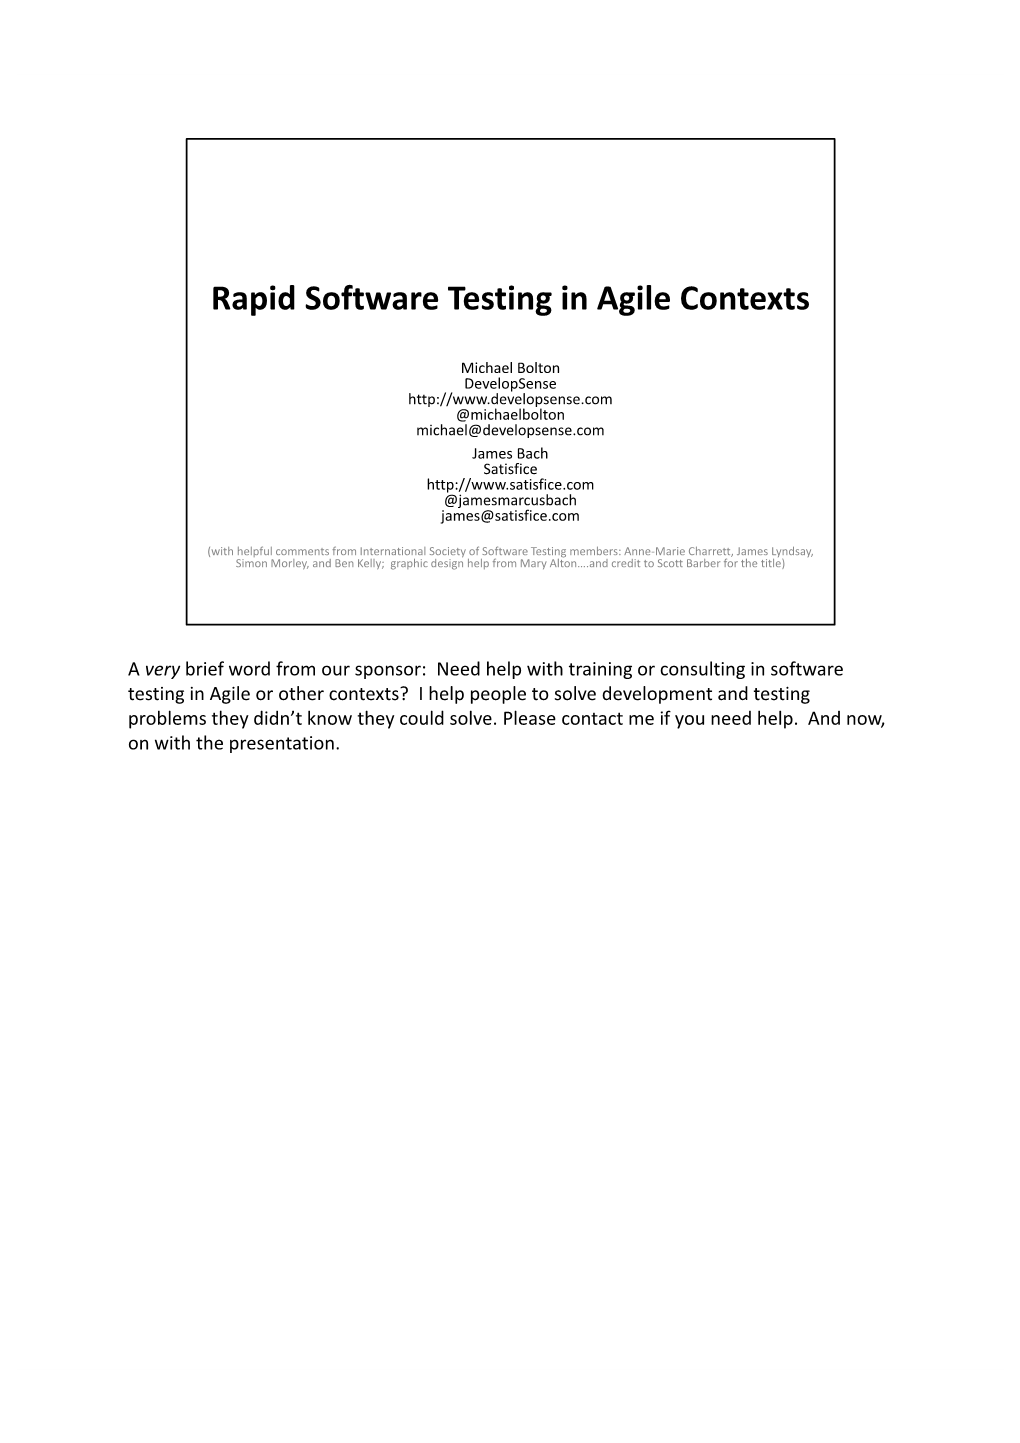 Rapid Software Testing in Agile Contexts